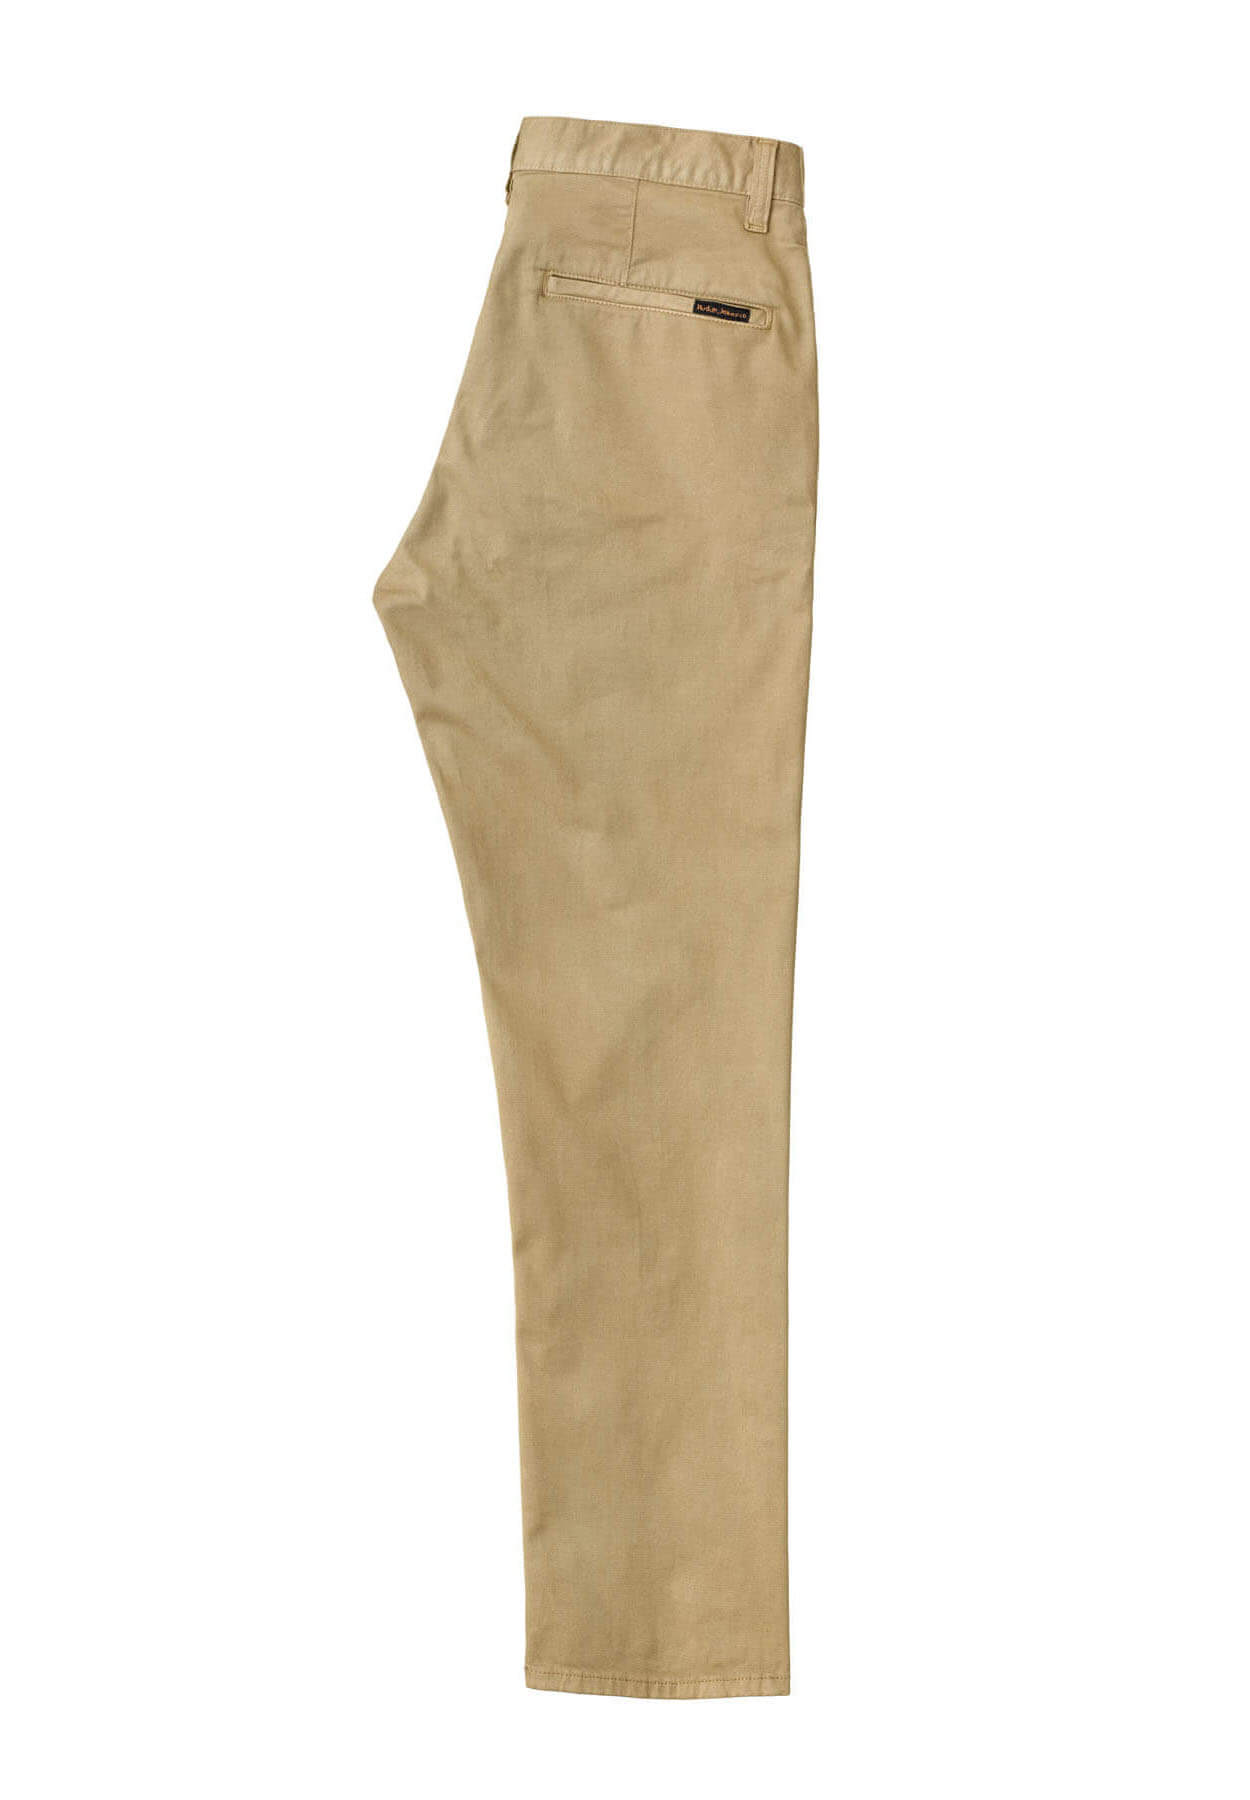 NUDIE JEANS Chinohose Easy Alvin Beige 30/32